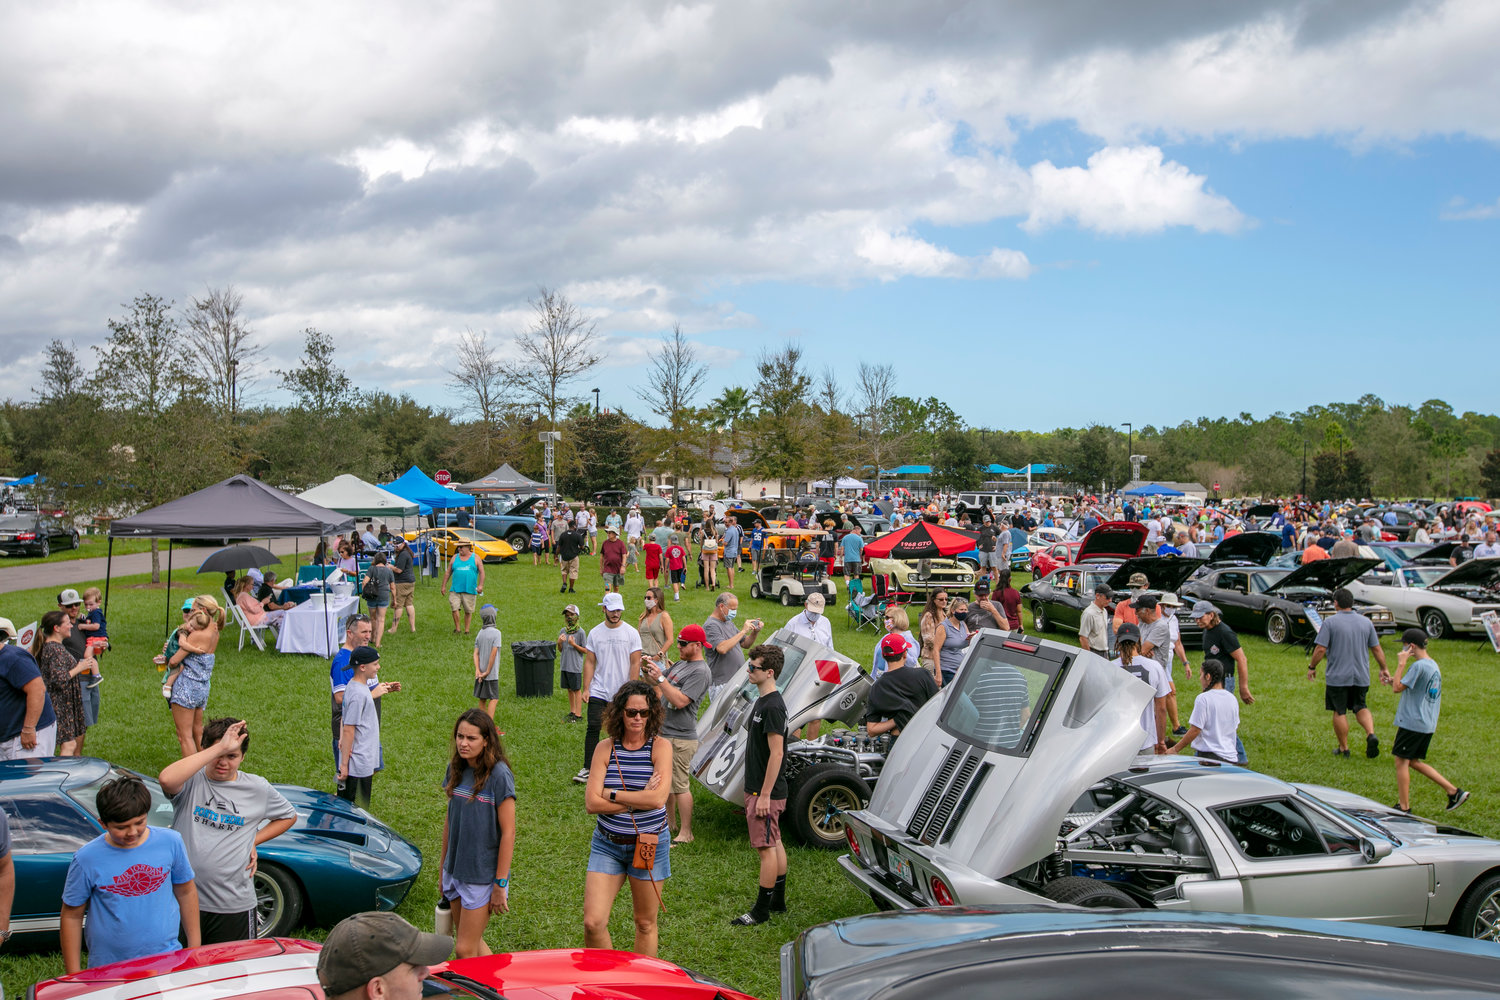 A record crowd was on hand for the 2020 Ponte Vedra Auto Show. A record crowd came out to the show, which was held despite being on the verge of being cancelled on two different occasions due to the COVID-19 pandemic and the threat of a hurricane. An array of modern to classic vehicles were showcased.